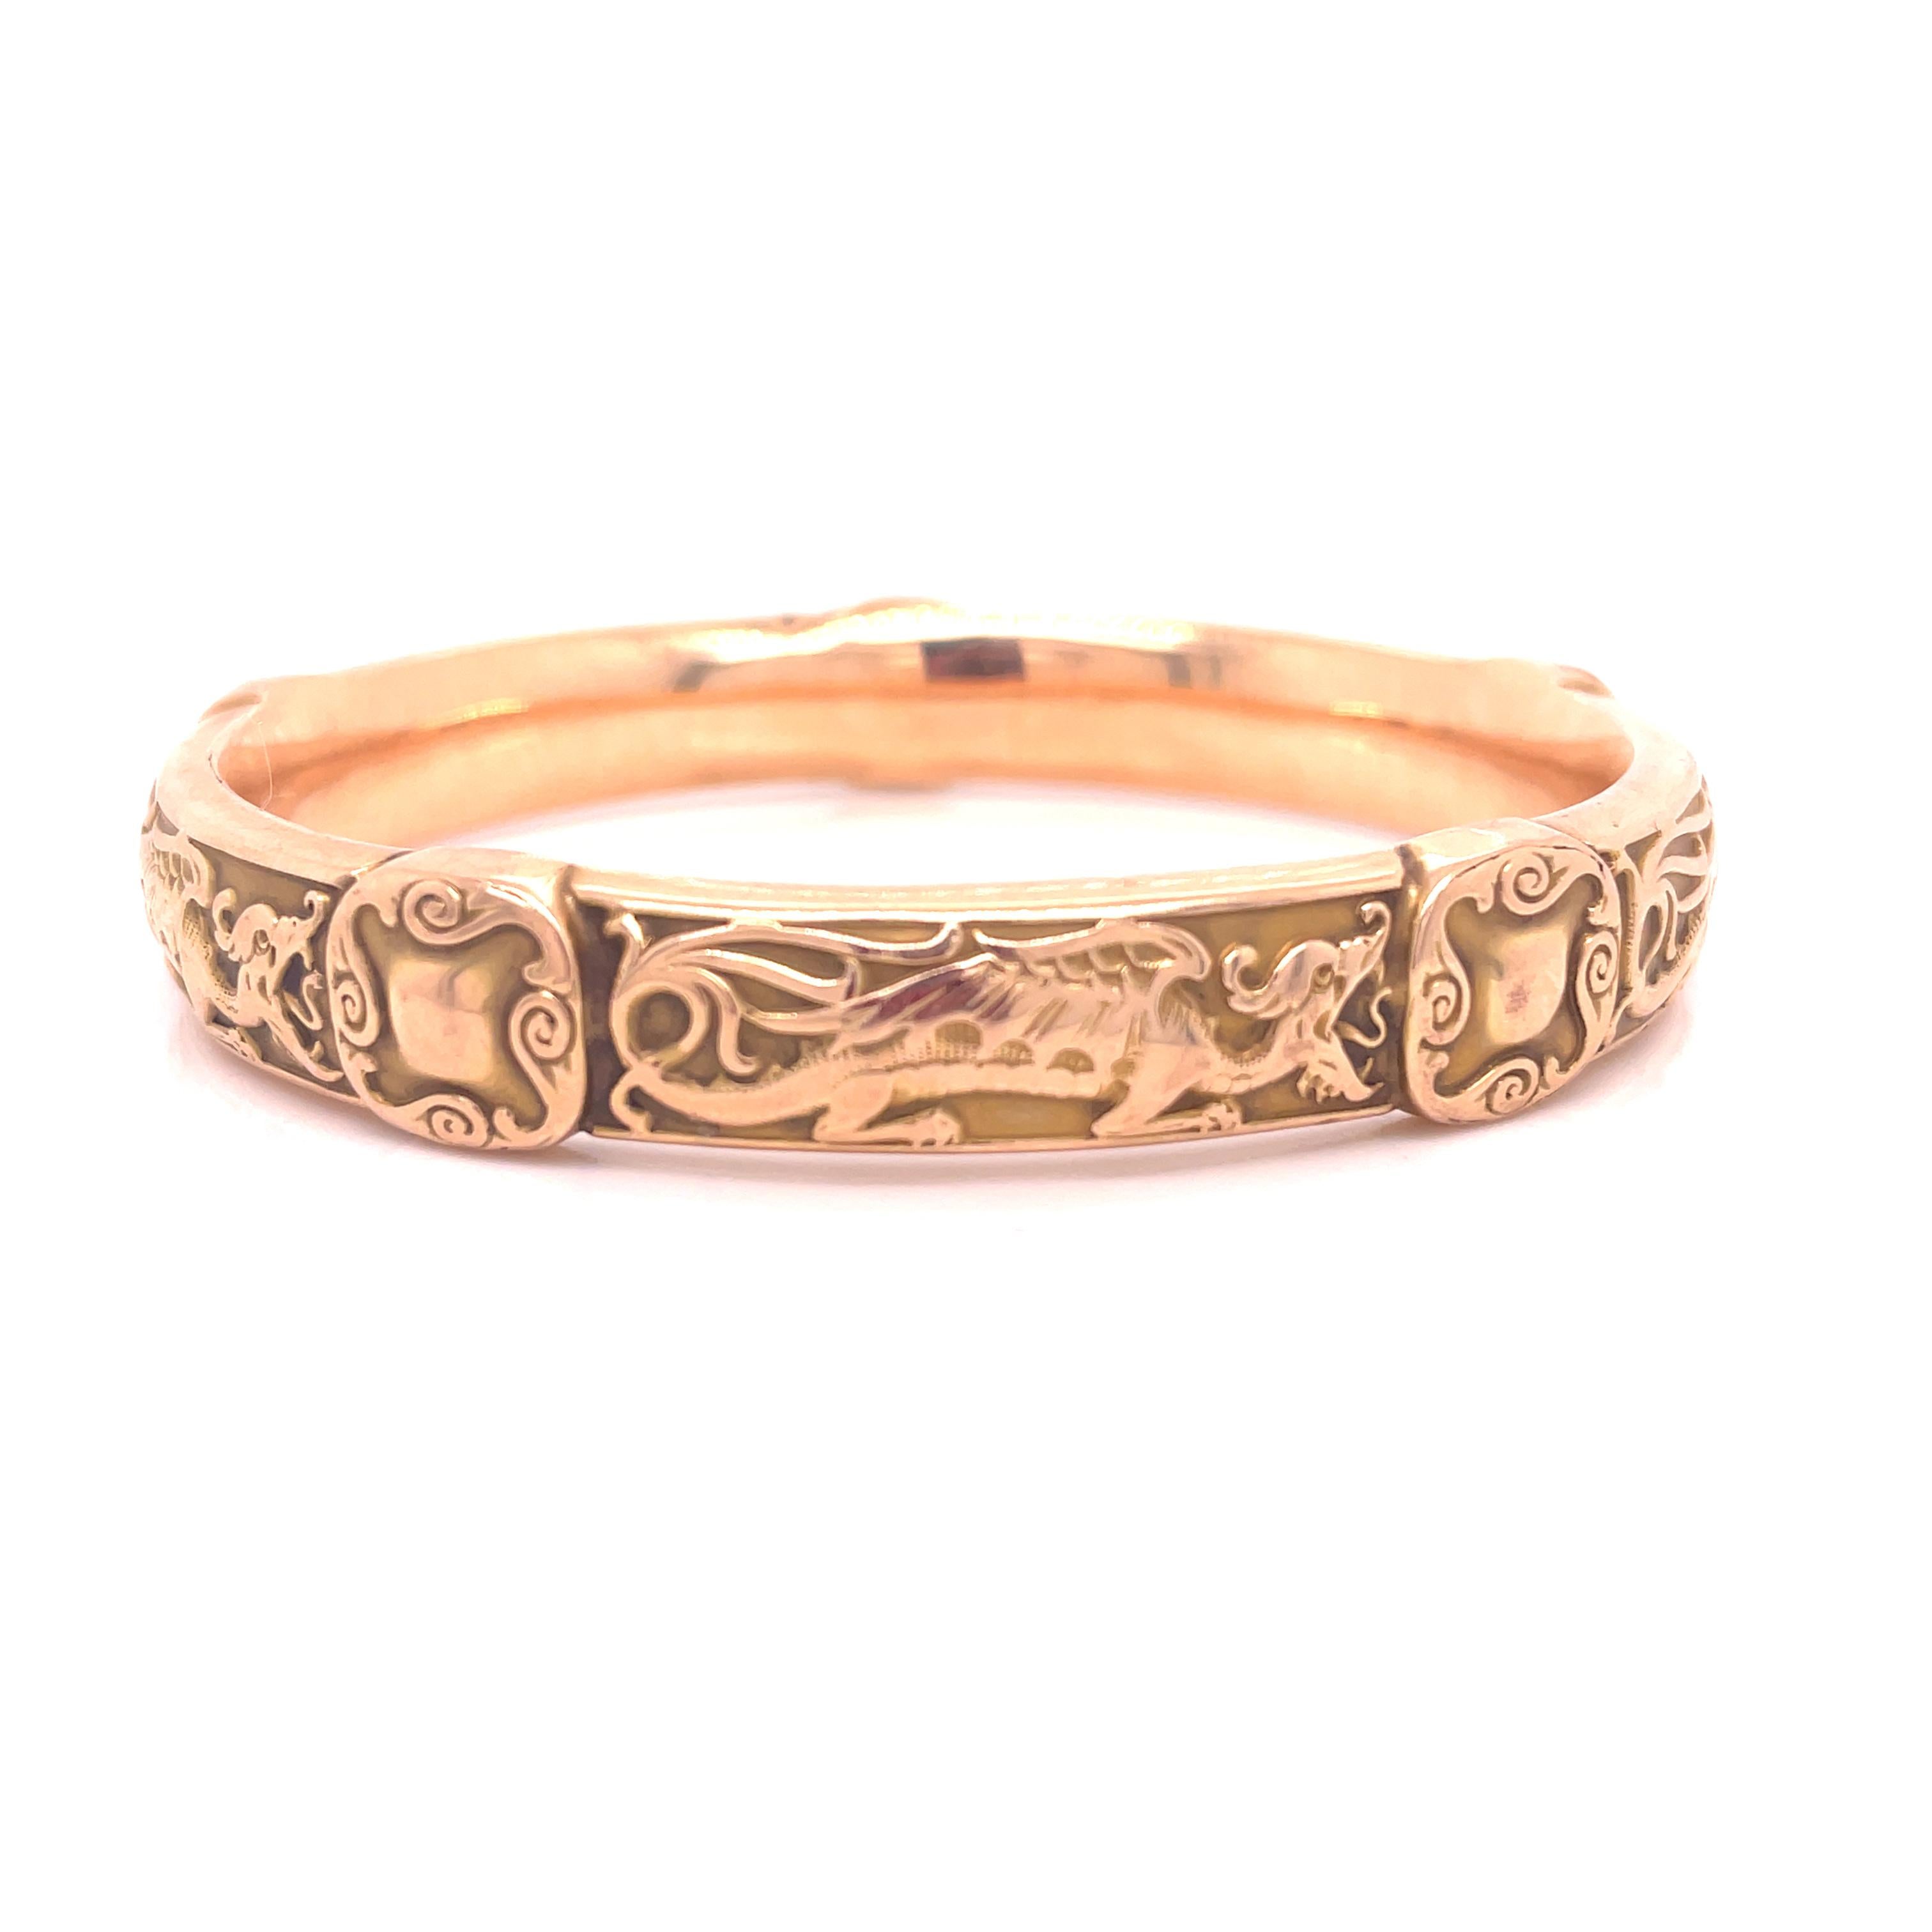 This is a brilliant original 1890 slip on Art Nouveau Riker Brothers bangle set in 14K Rose gold that features an amazing engraved dragon design. This bangle measures 7.25